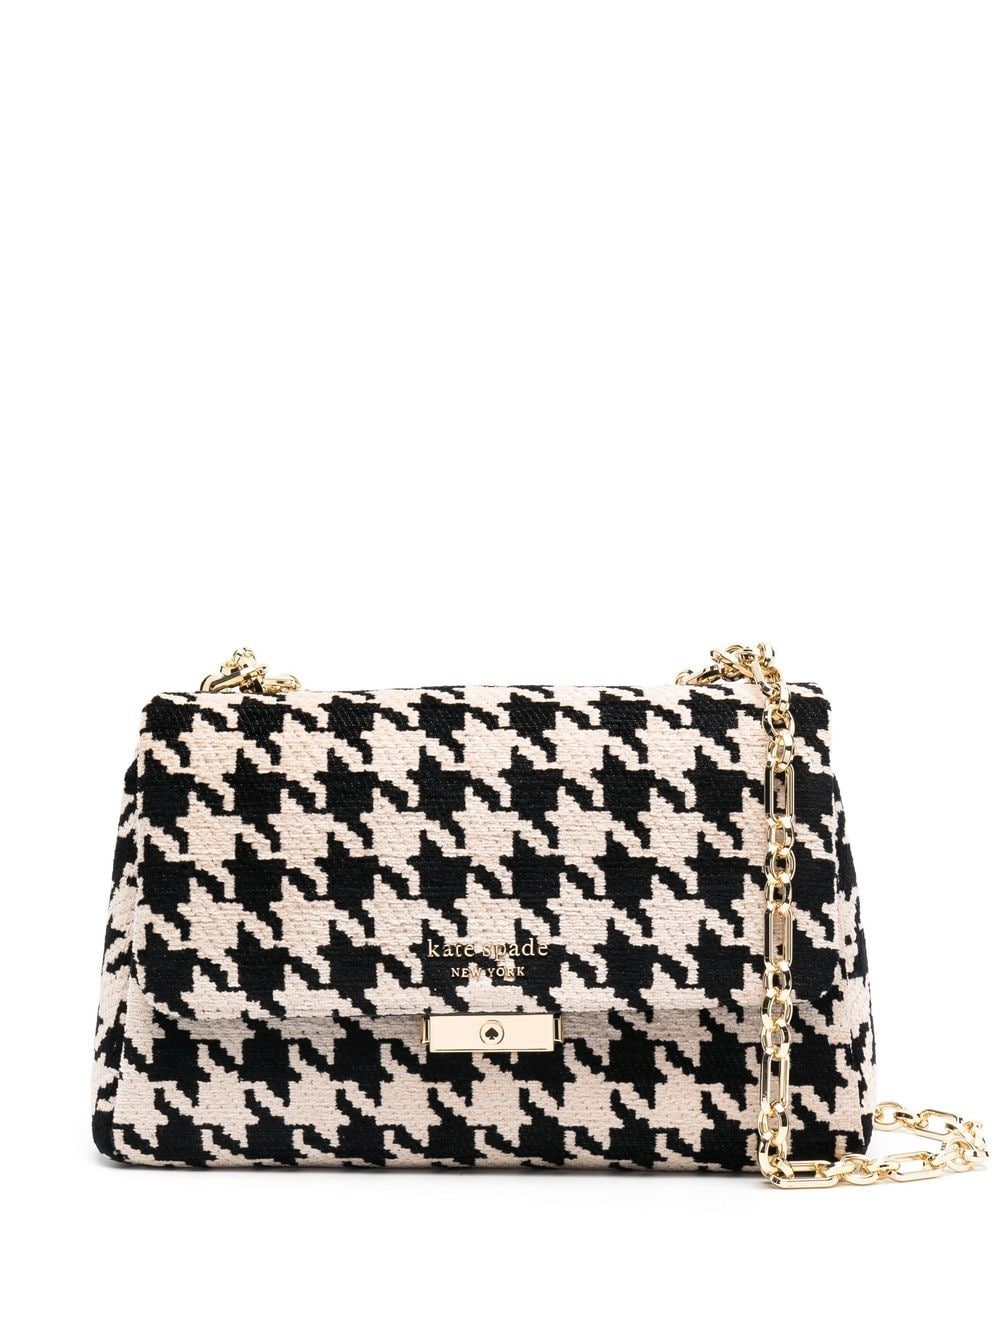 kate spade houndstooth tote